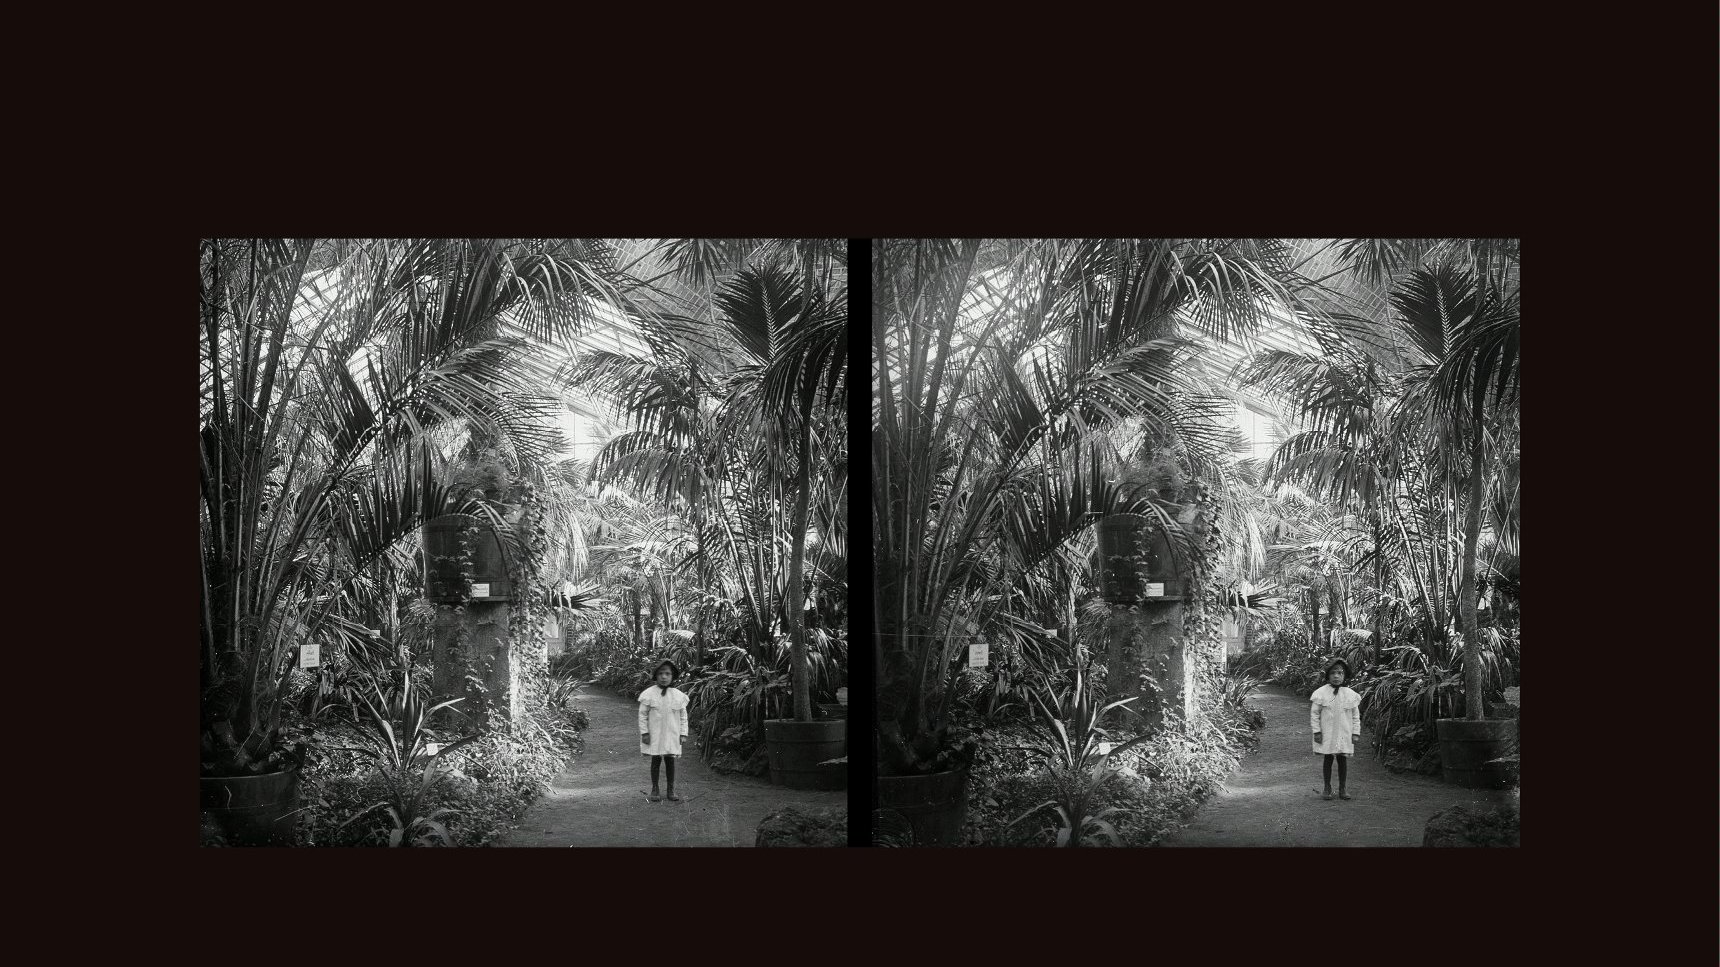 Black and white stereophotograph of an area with palm trees. In the middle, on a pathway, a child in a white coat.